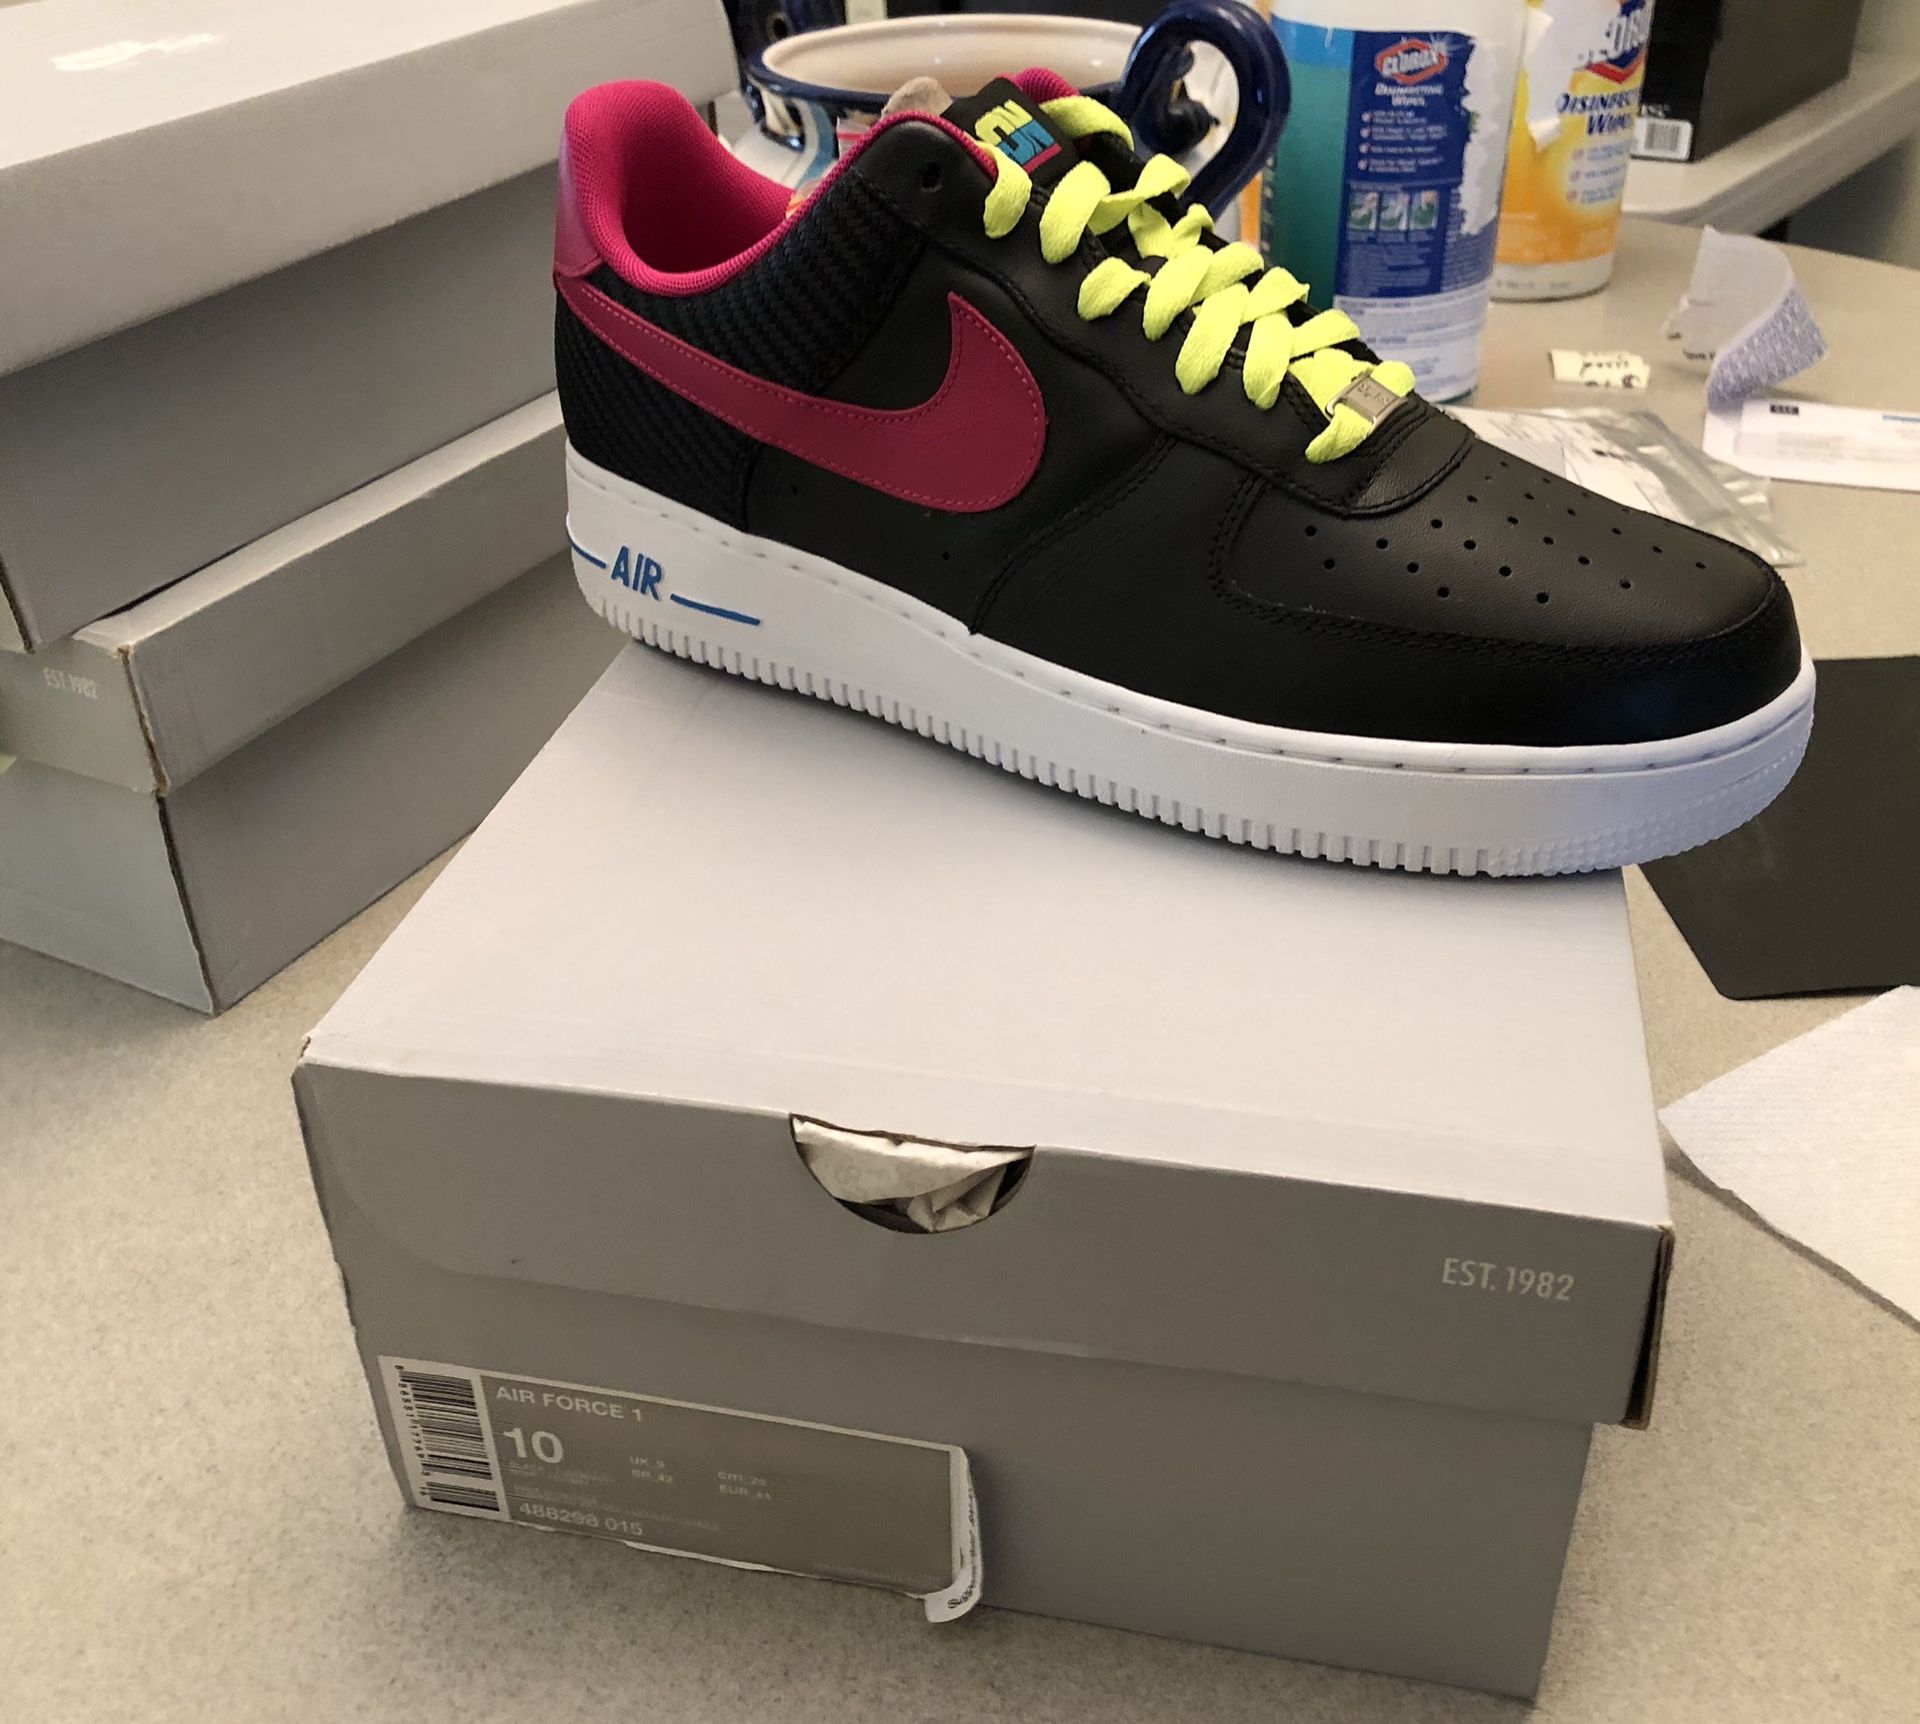 Air Force 1 low size 10 brand new